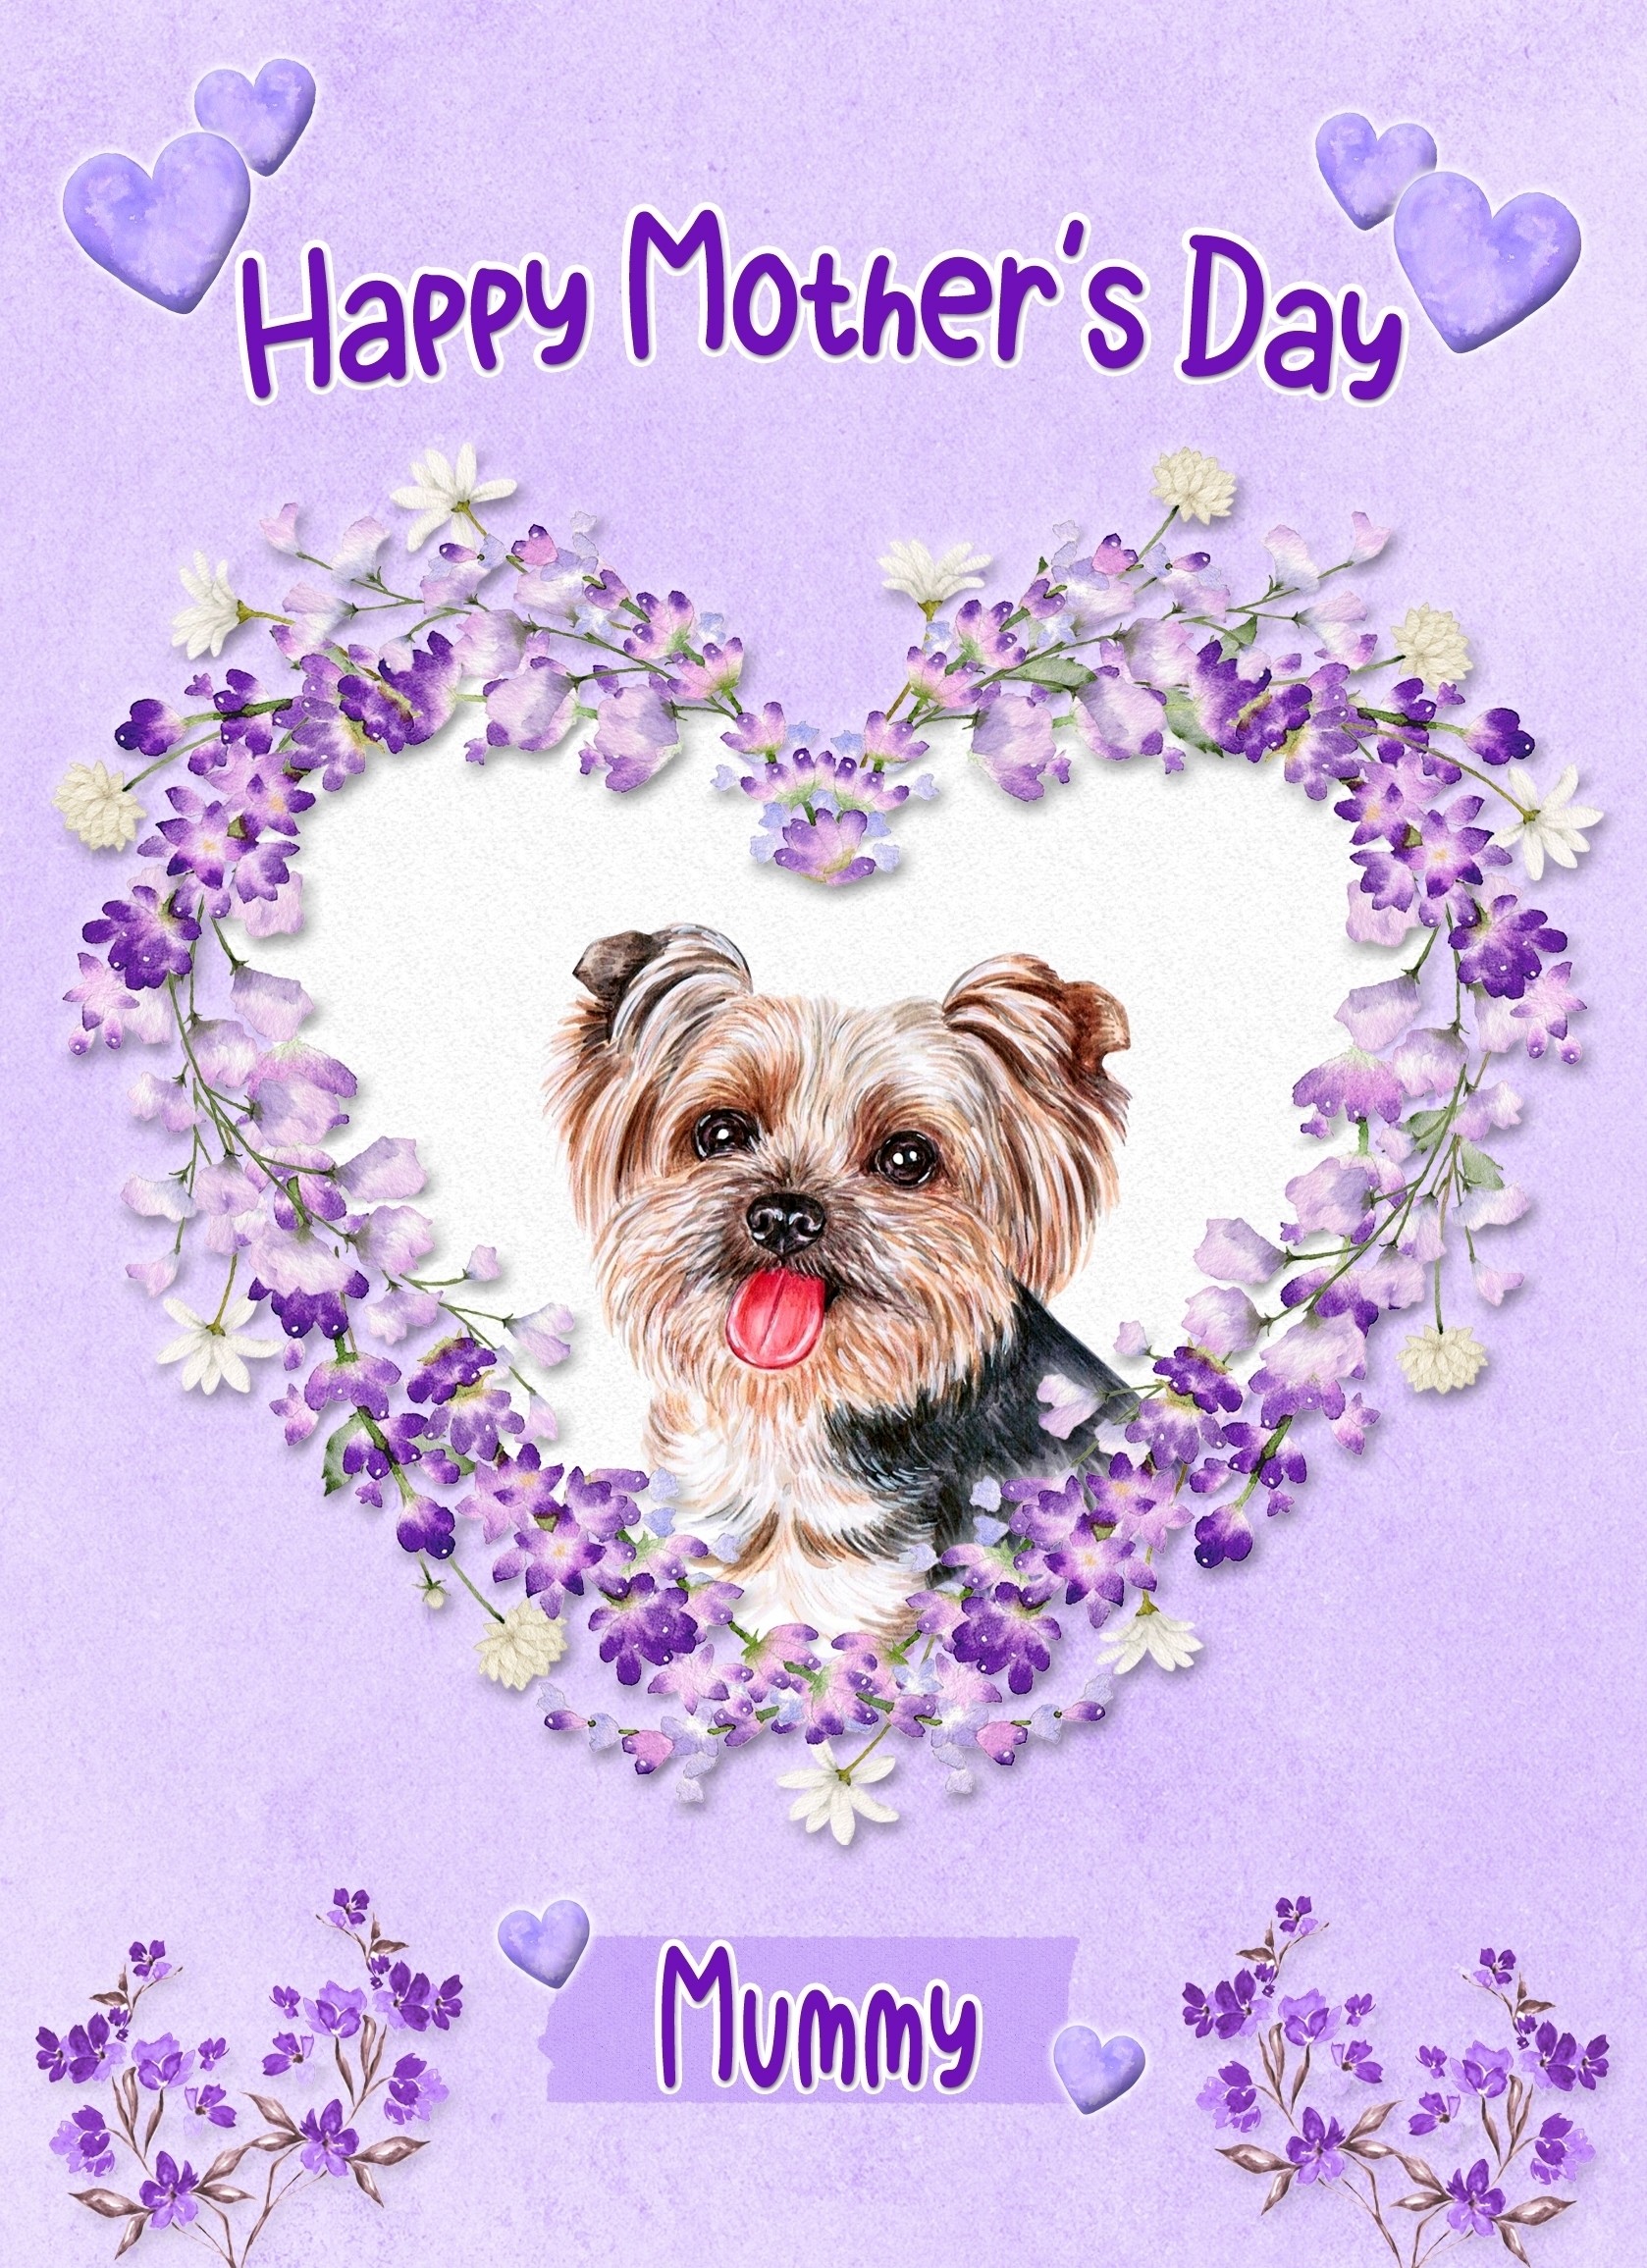 Yorkshire Terrier Dog Mothers Day Card (Happy Mothers, Mummy)